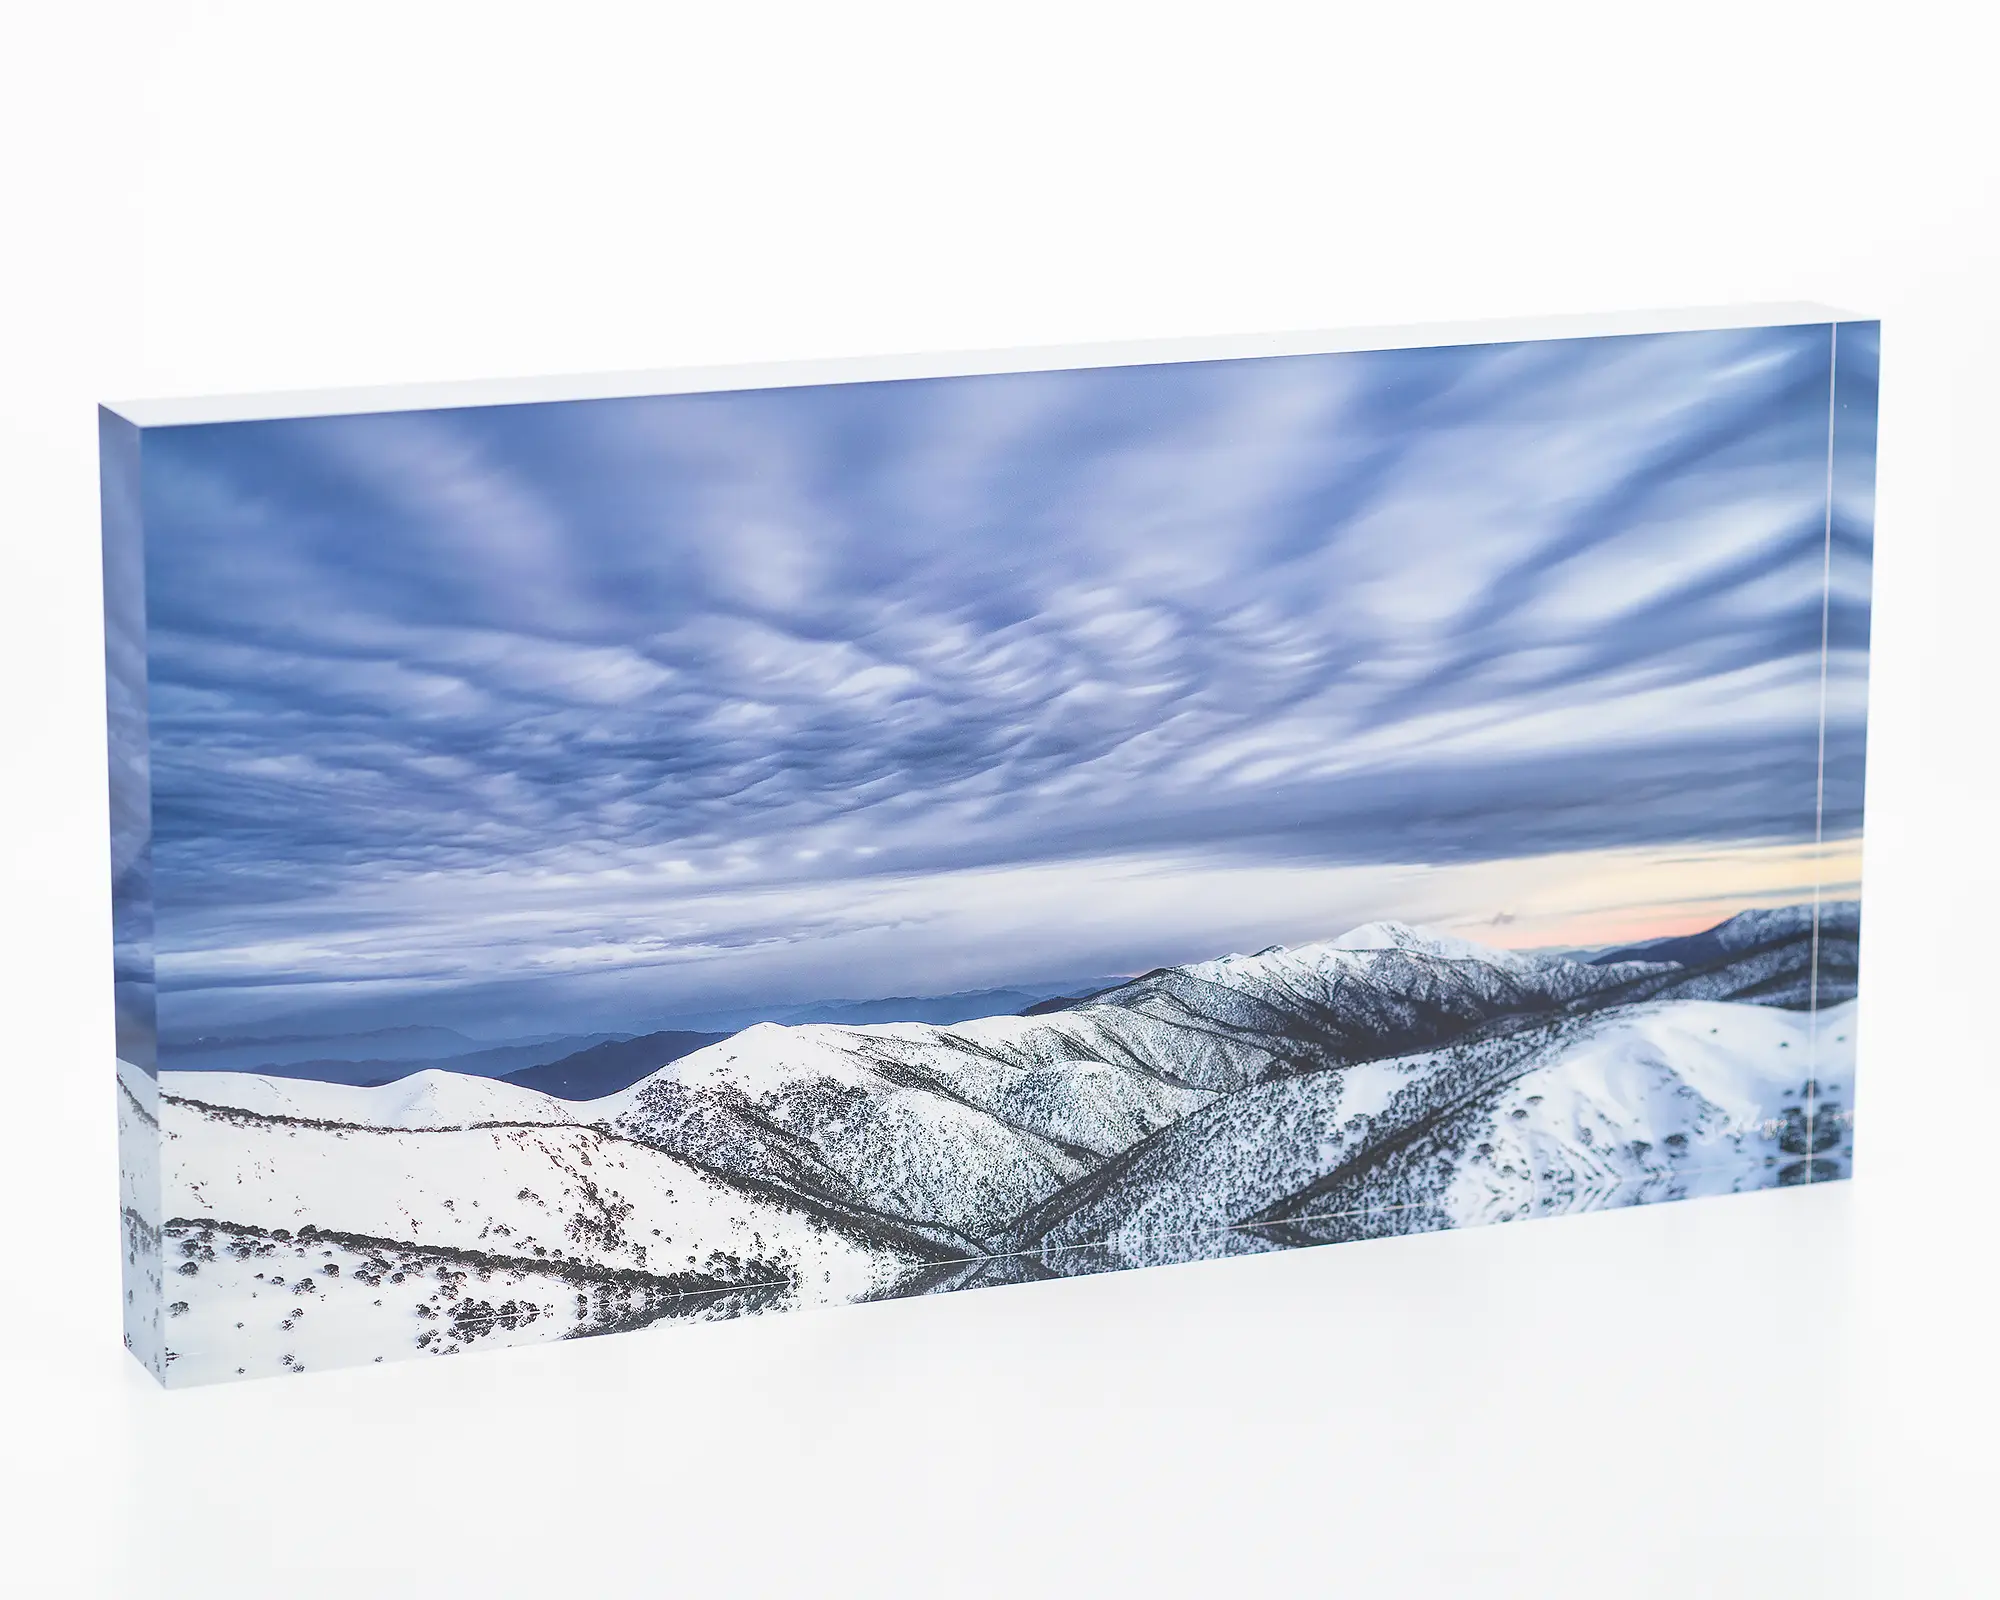 Before The Storm - Acrylic block of winter snow, Mount Feathertop artwork